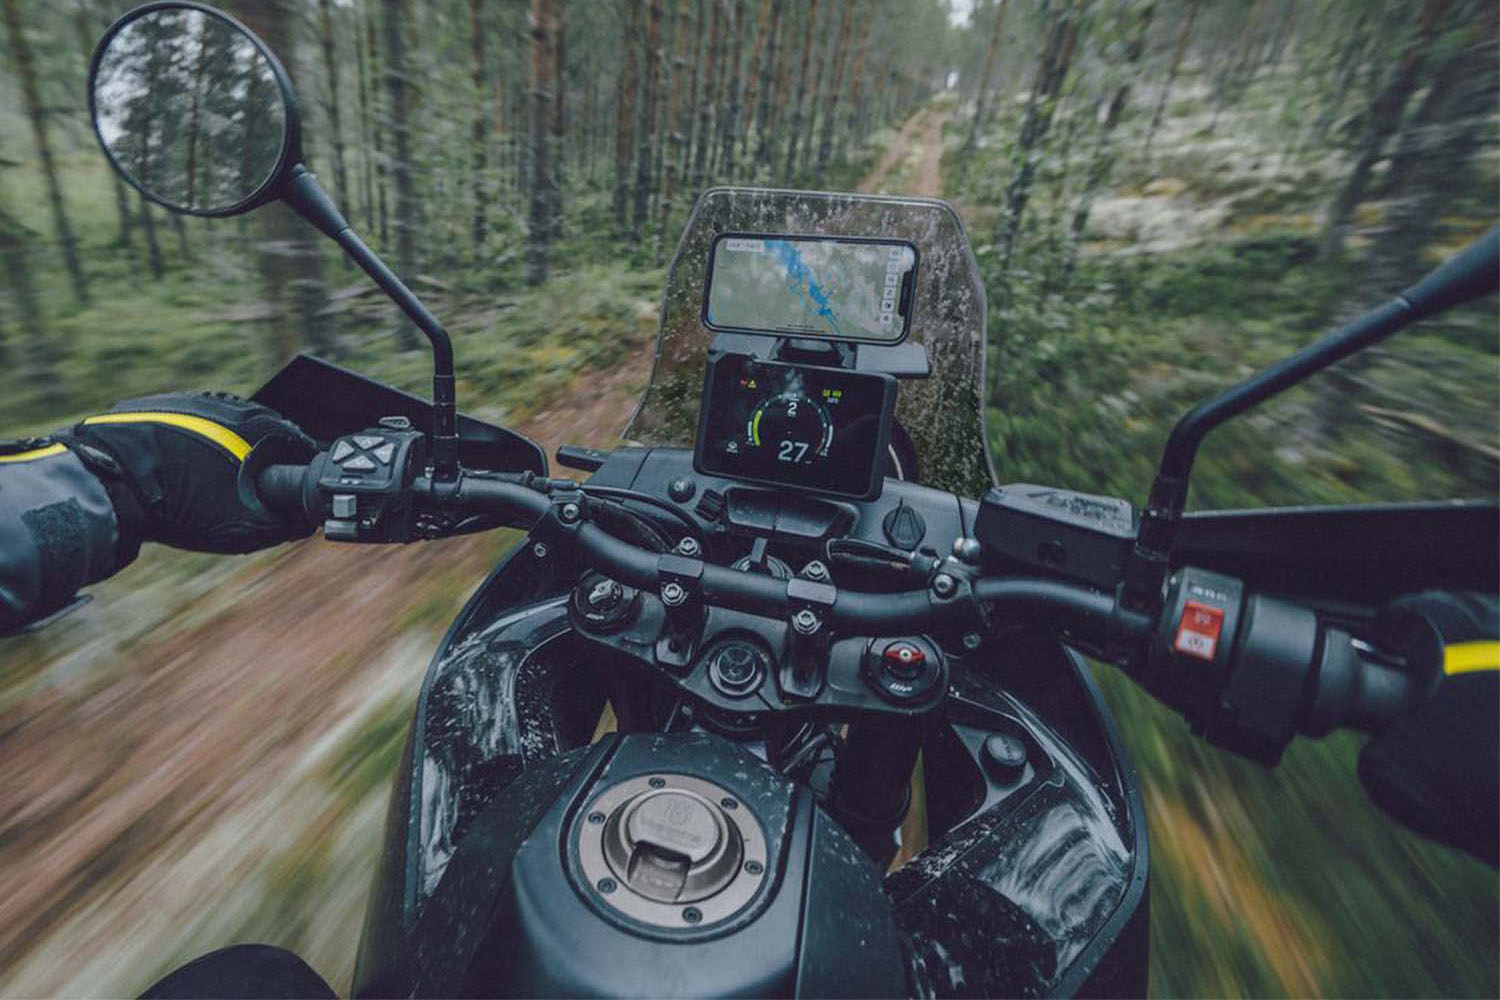 A view of a rider enjoying the all-new 2022 Husqvarna Norden 901, available as of today